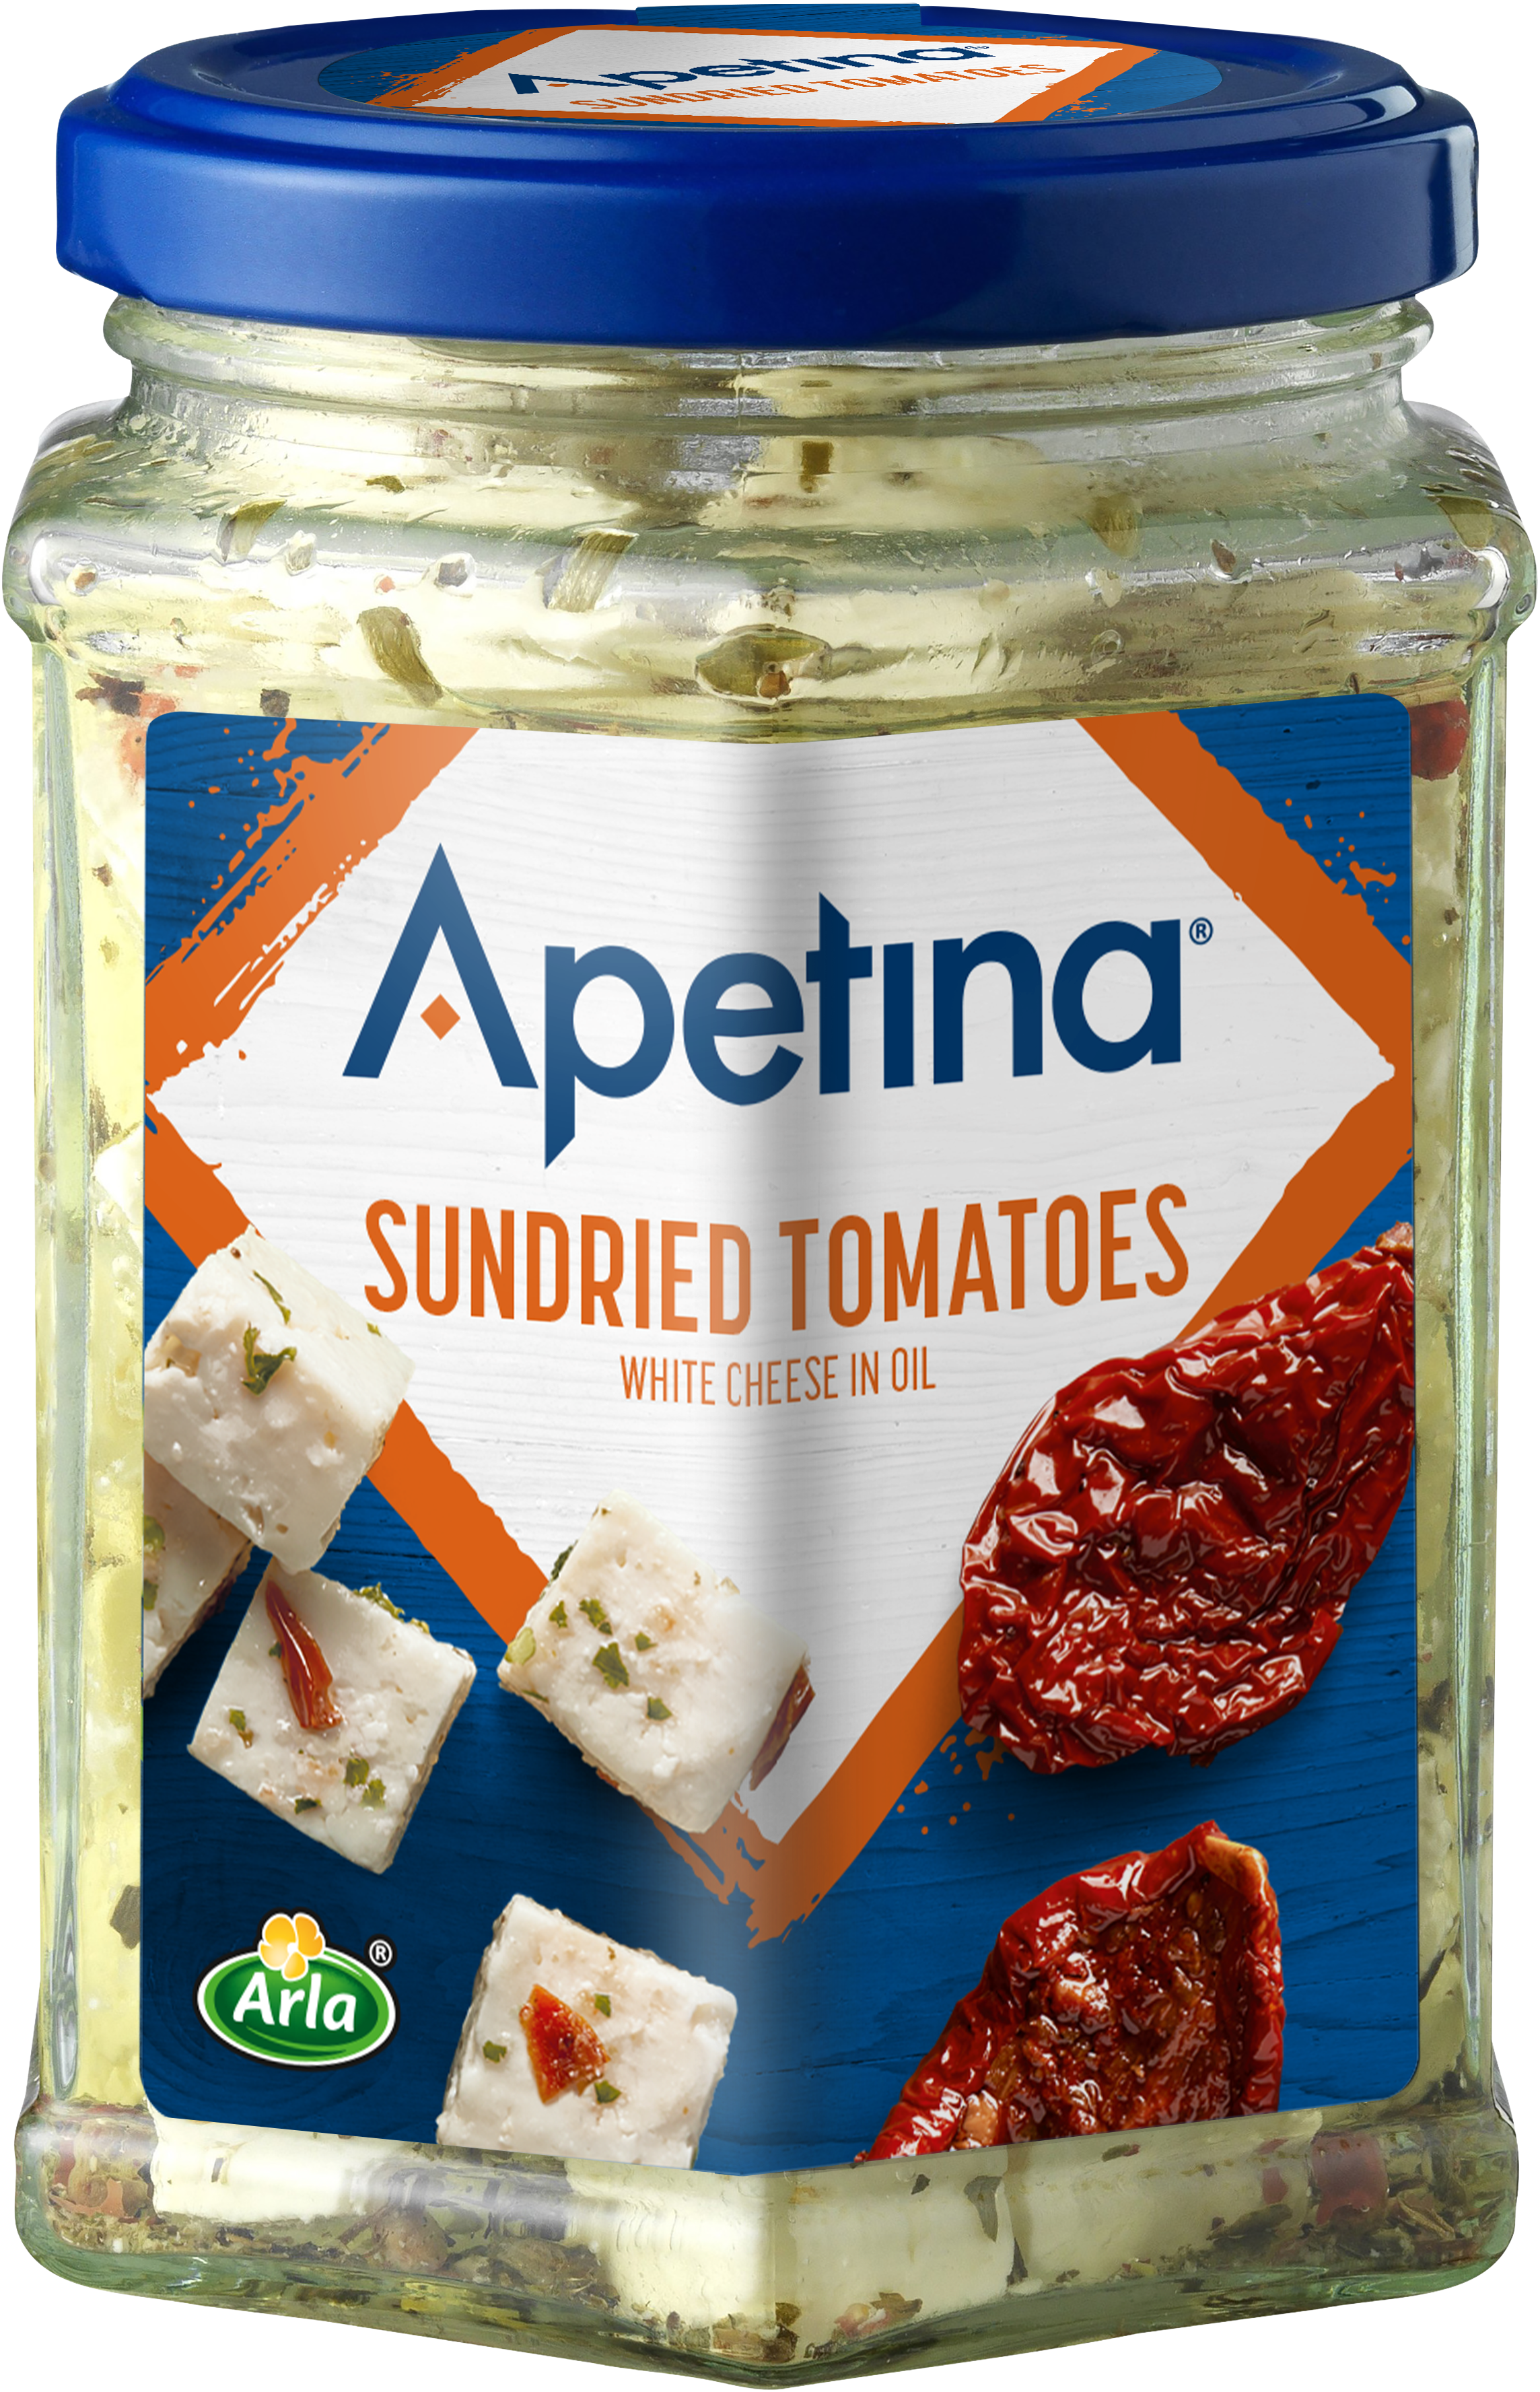 Apetina® Apetina white cheese cubes in oil Sundried Tomatoes 265g